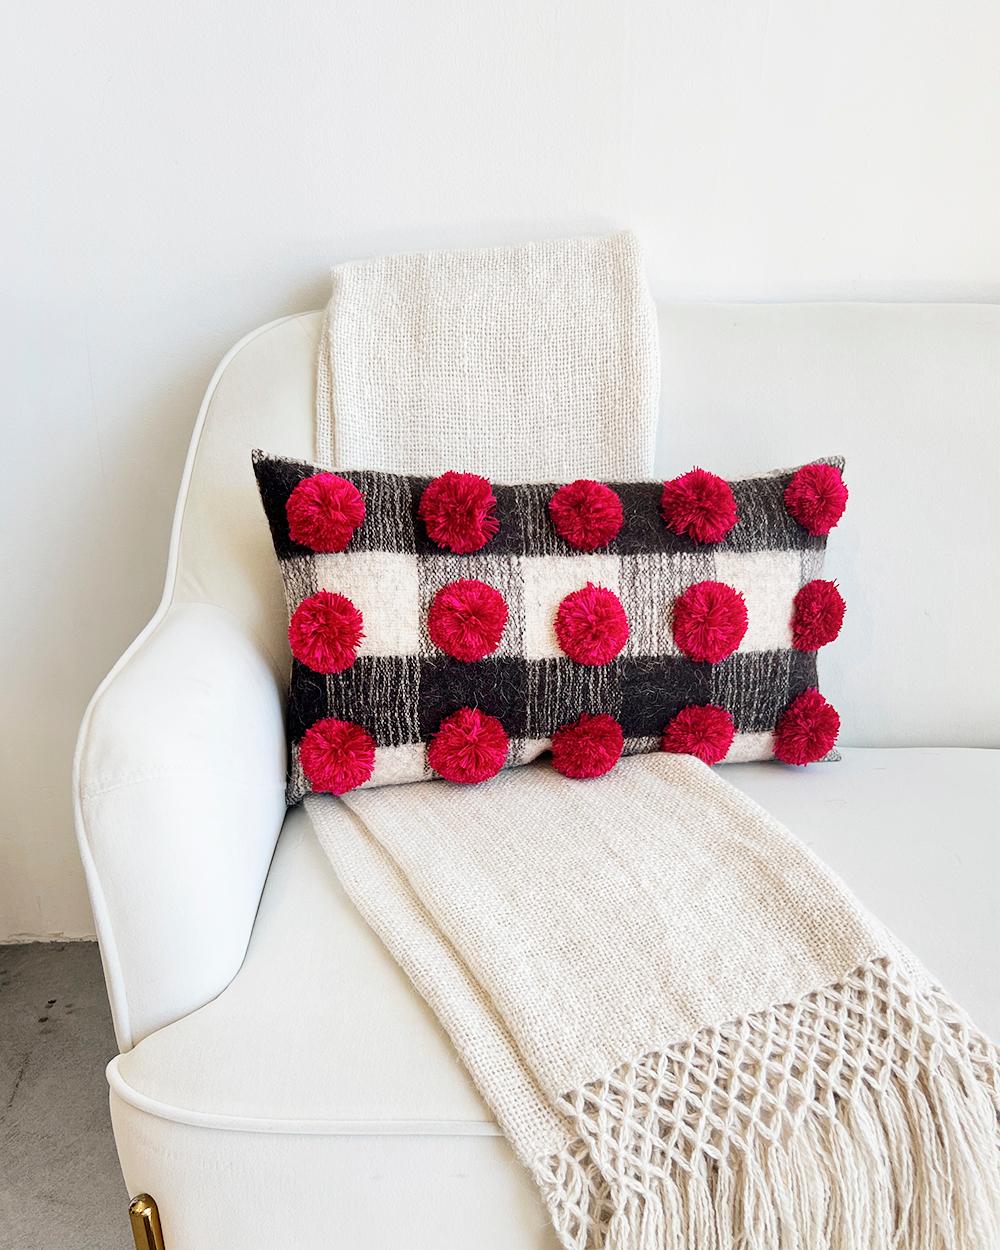 Add some subtle and elegant holiday vides to your home decor
This lumbar pillow from Chamula blends rustic charm with subtle holiday cheer. Crafted from wool, it features a black and white striped base with red pompom accents, ideal for seasonal